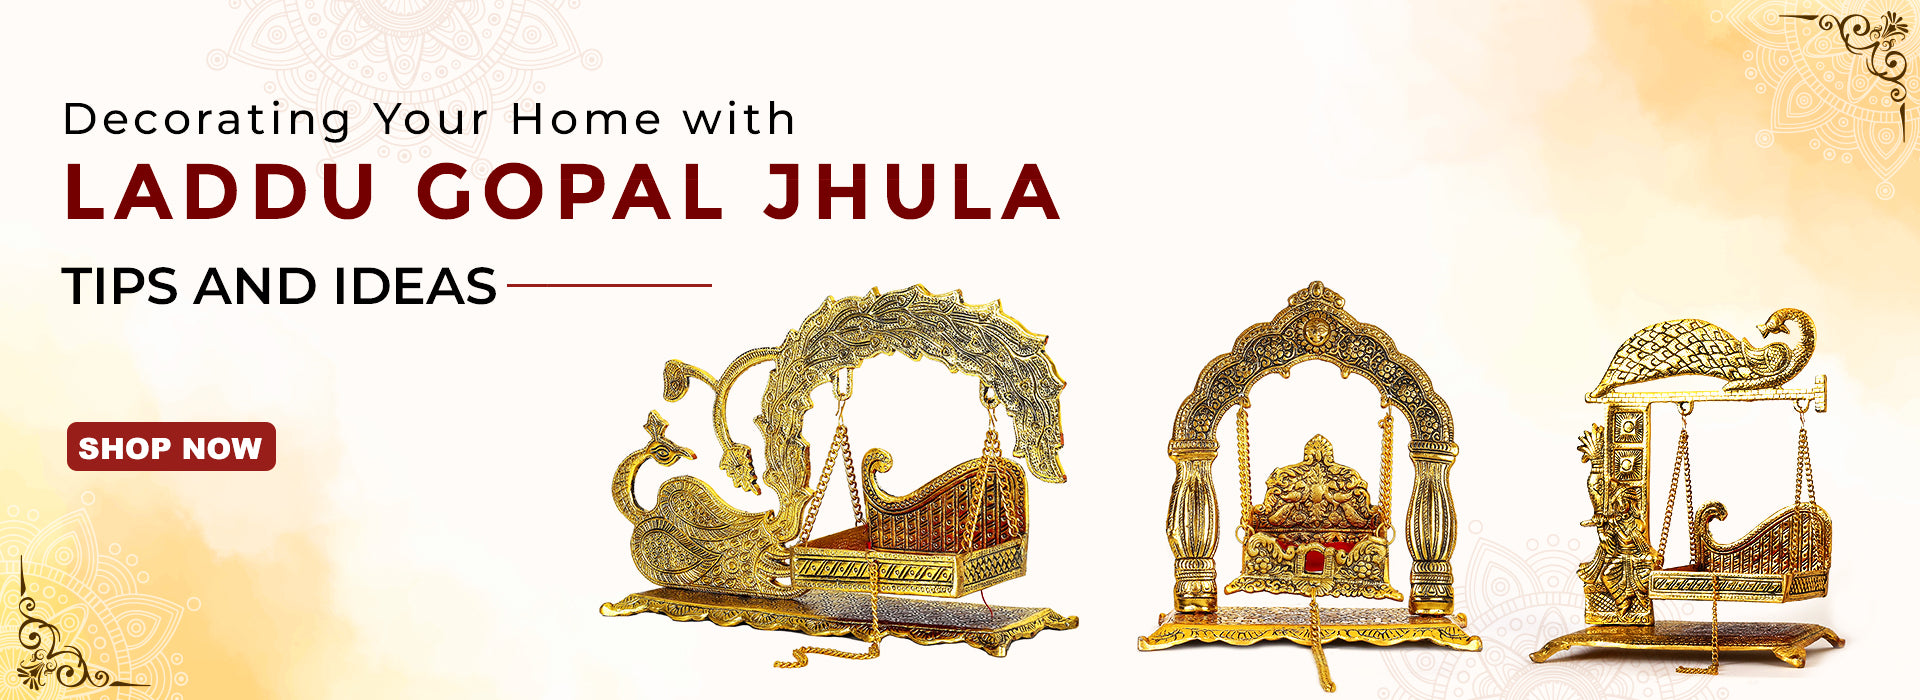 Decorating Your Home with Laddu Gopal Jhula: Tips and Ideas